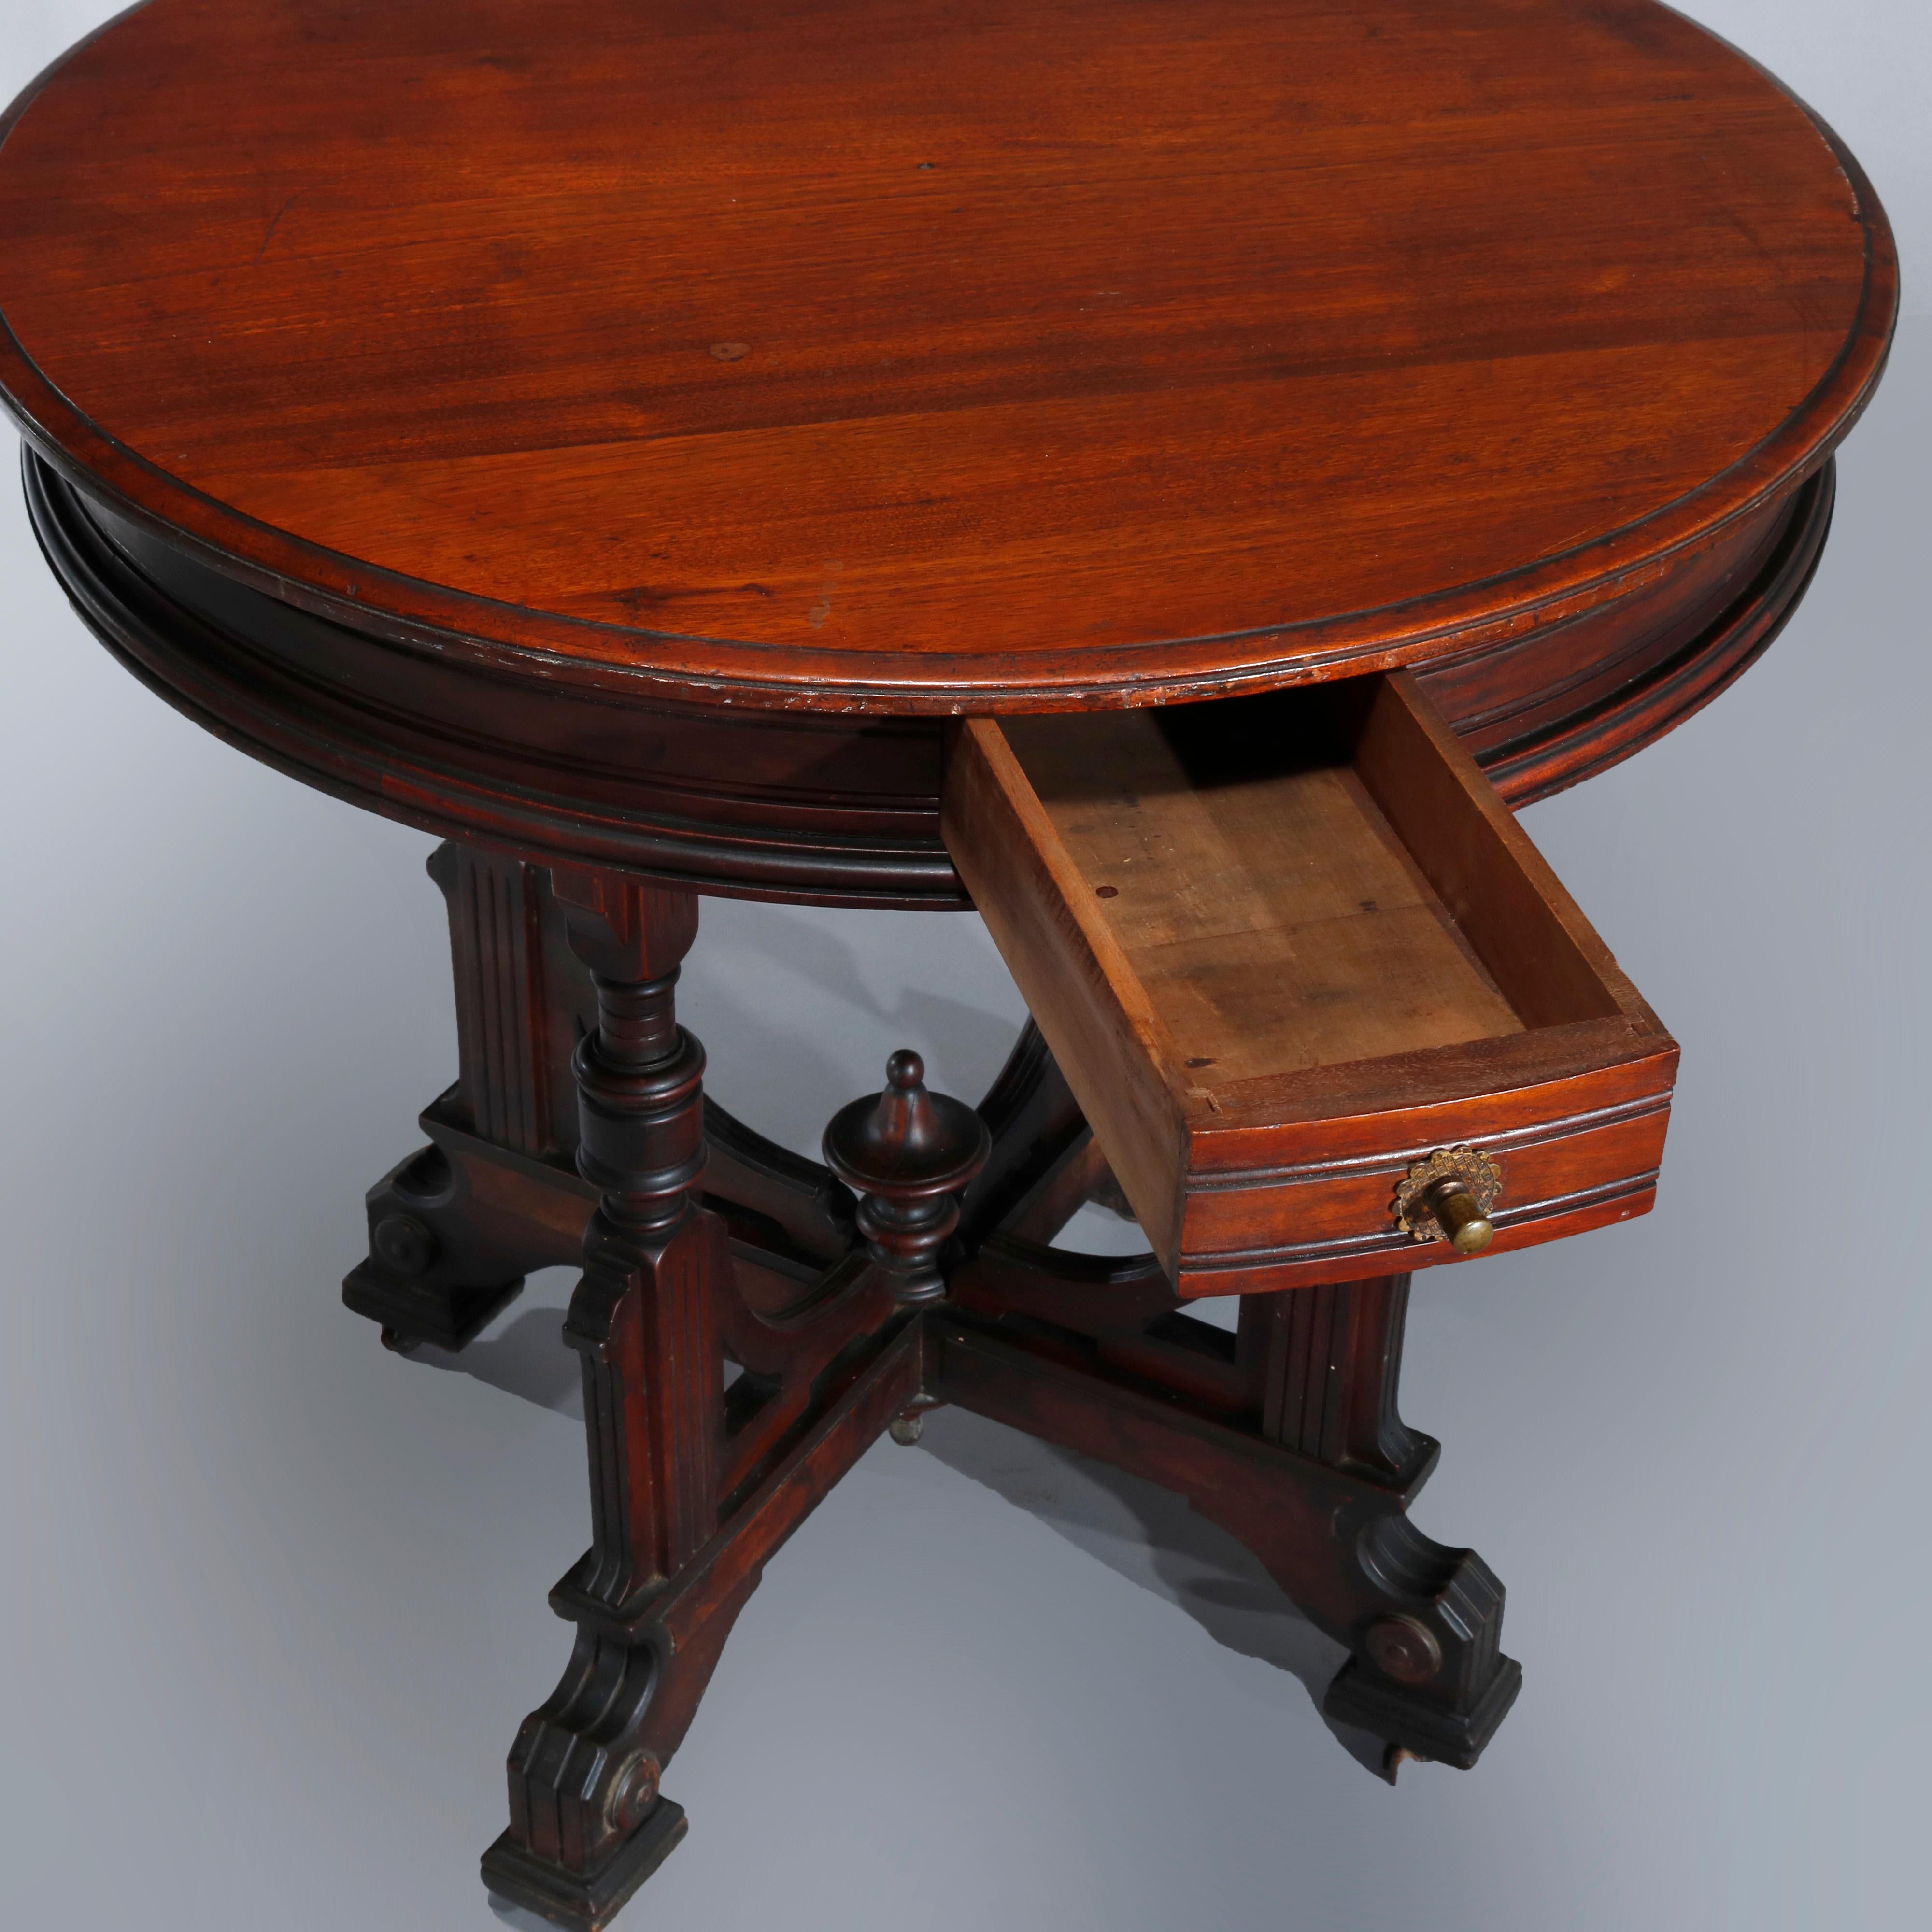 19th Century Antique Eastlake Carved Walnut Single Drawer Parlor Lamp Table, circa 1890